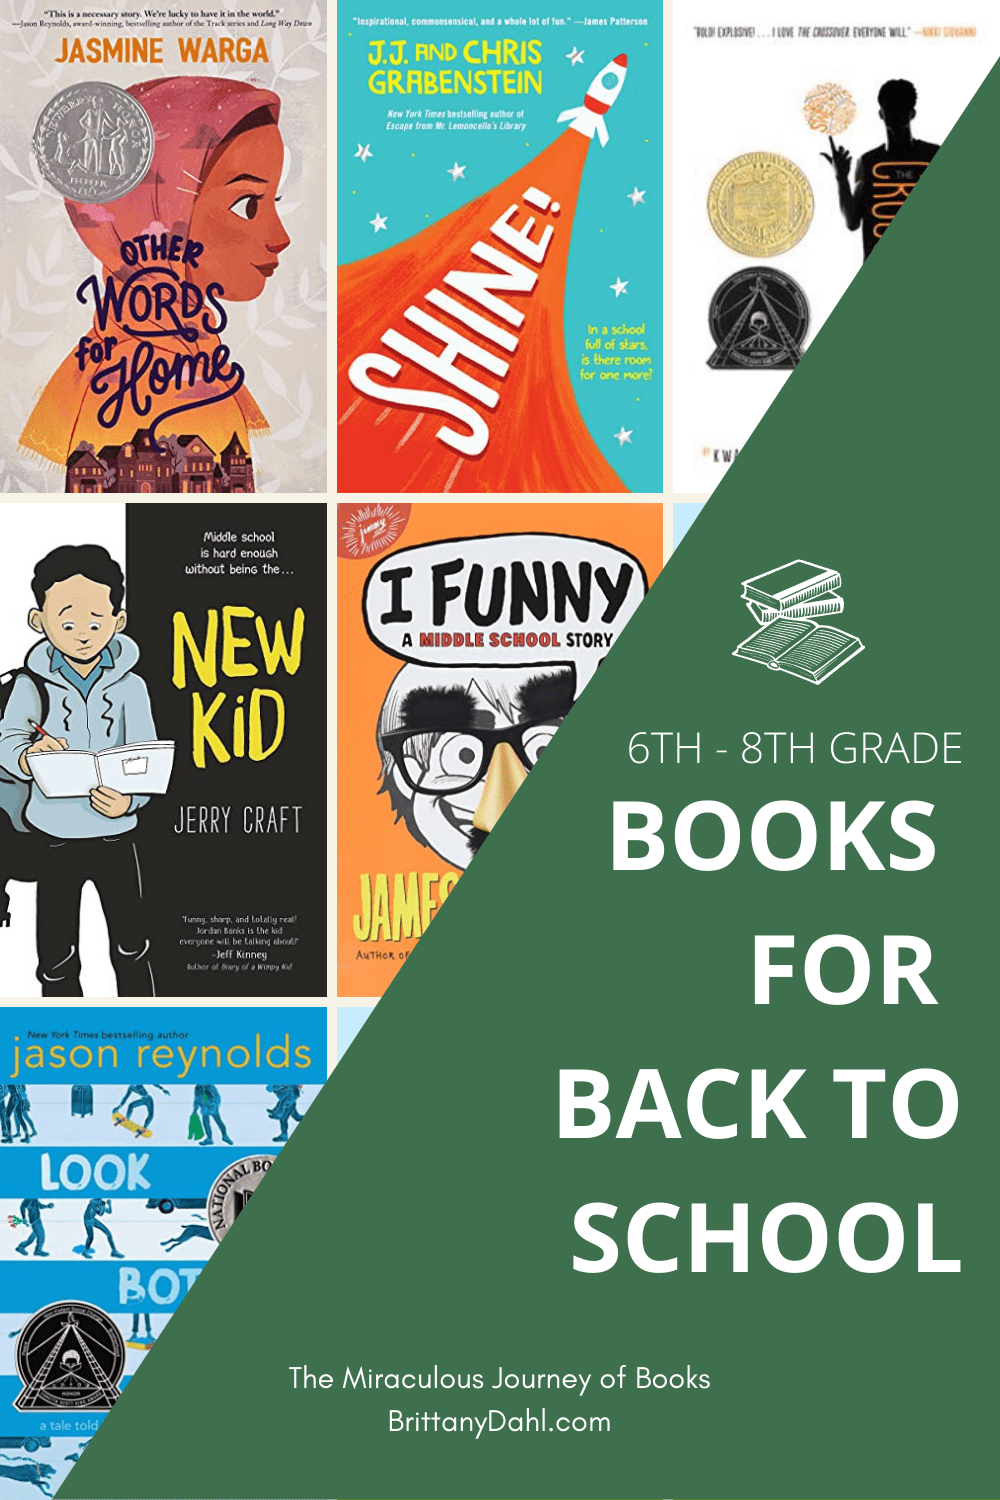 6th - 8th grade books for back to school from The Miraculous Journey of Books at BrittanyDahl.com. Image of book covers shared in this post. The Crossover, I Funny, New Kid, Shine, and more.